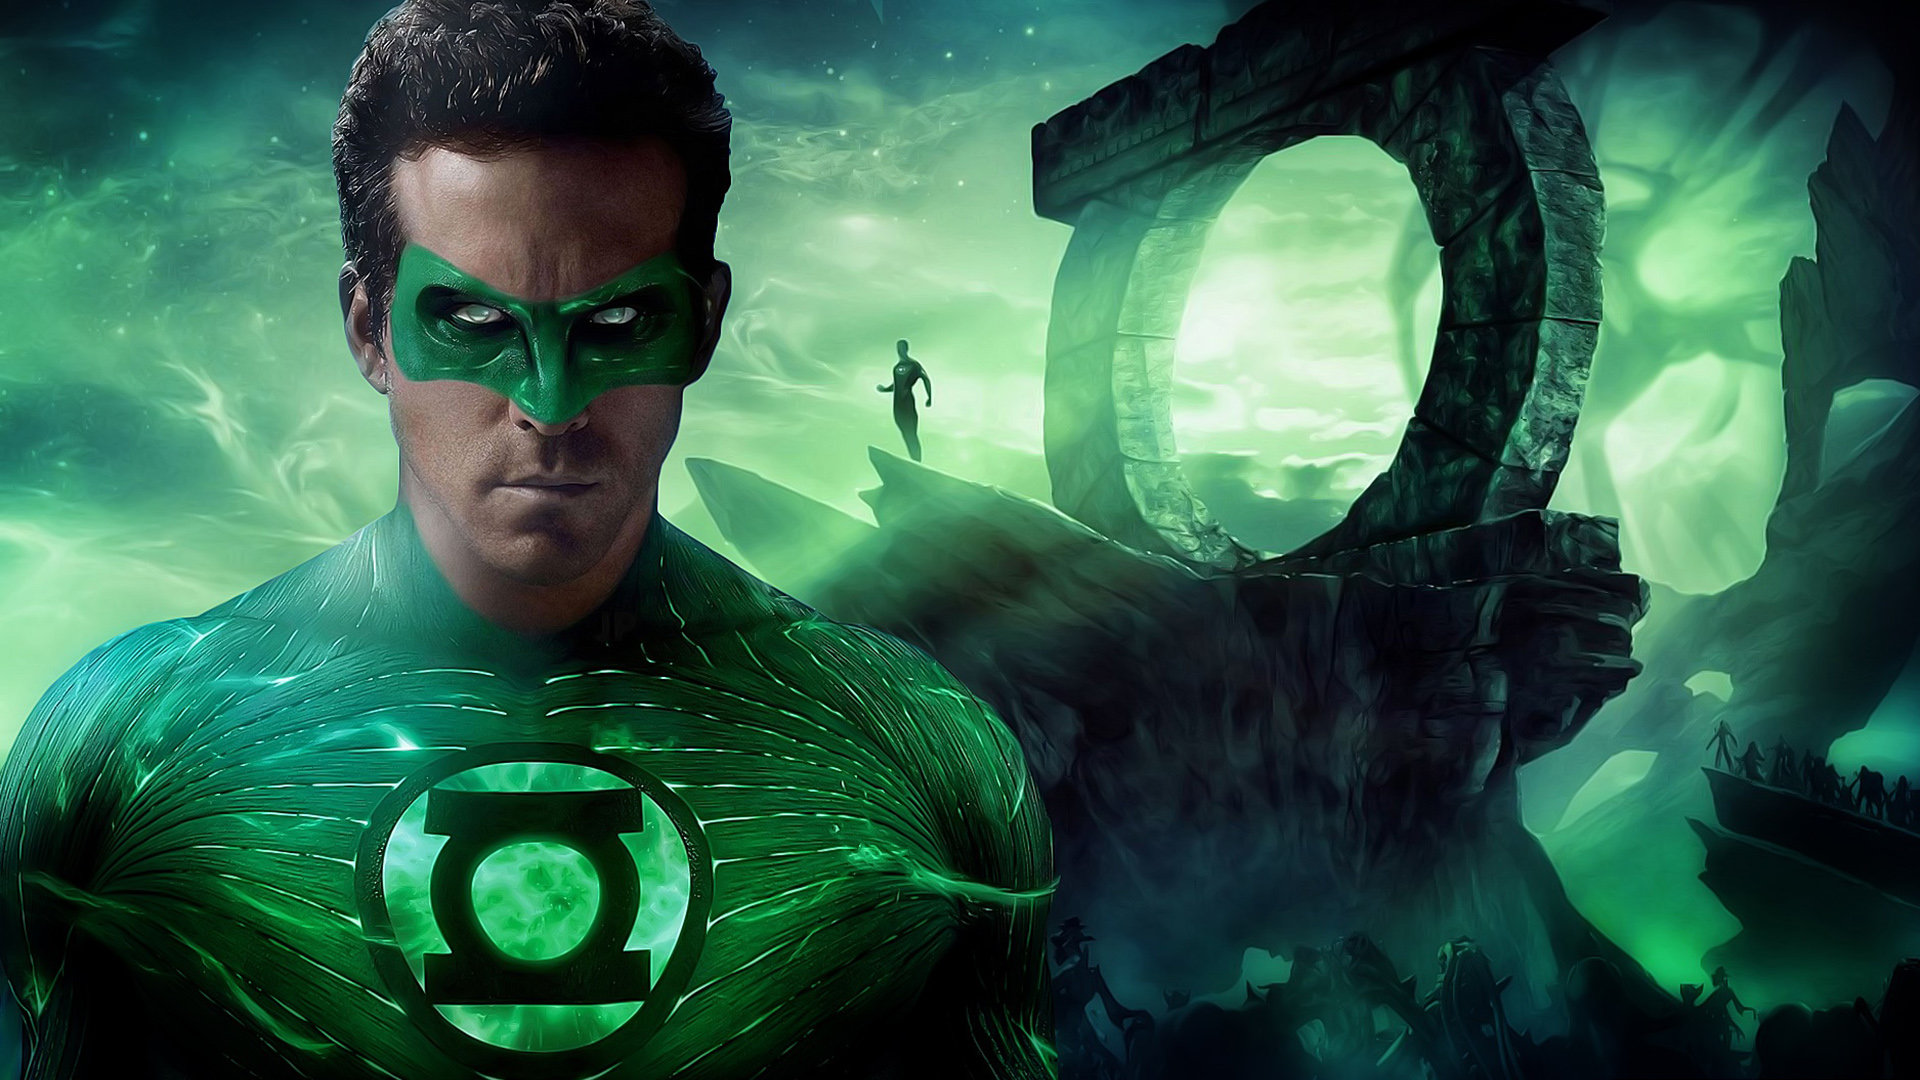 Download full hd 1080p Green Lantern Movie PC background ID:50673 for free